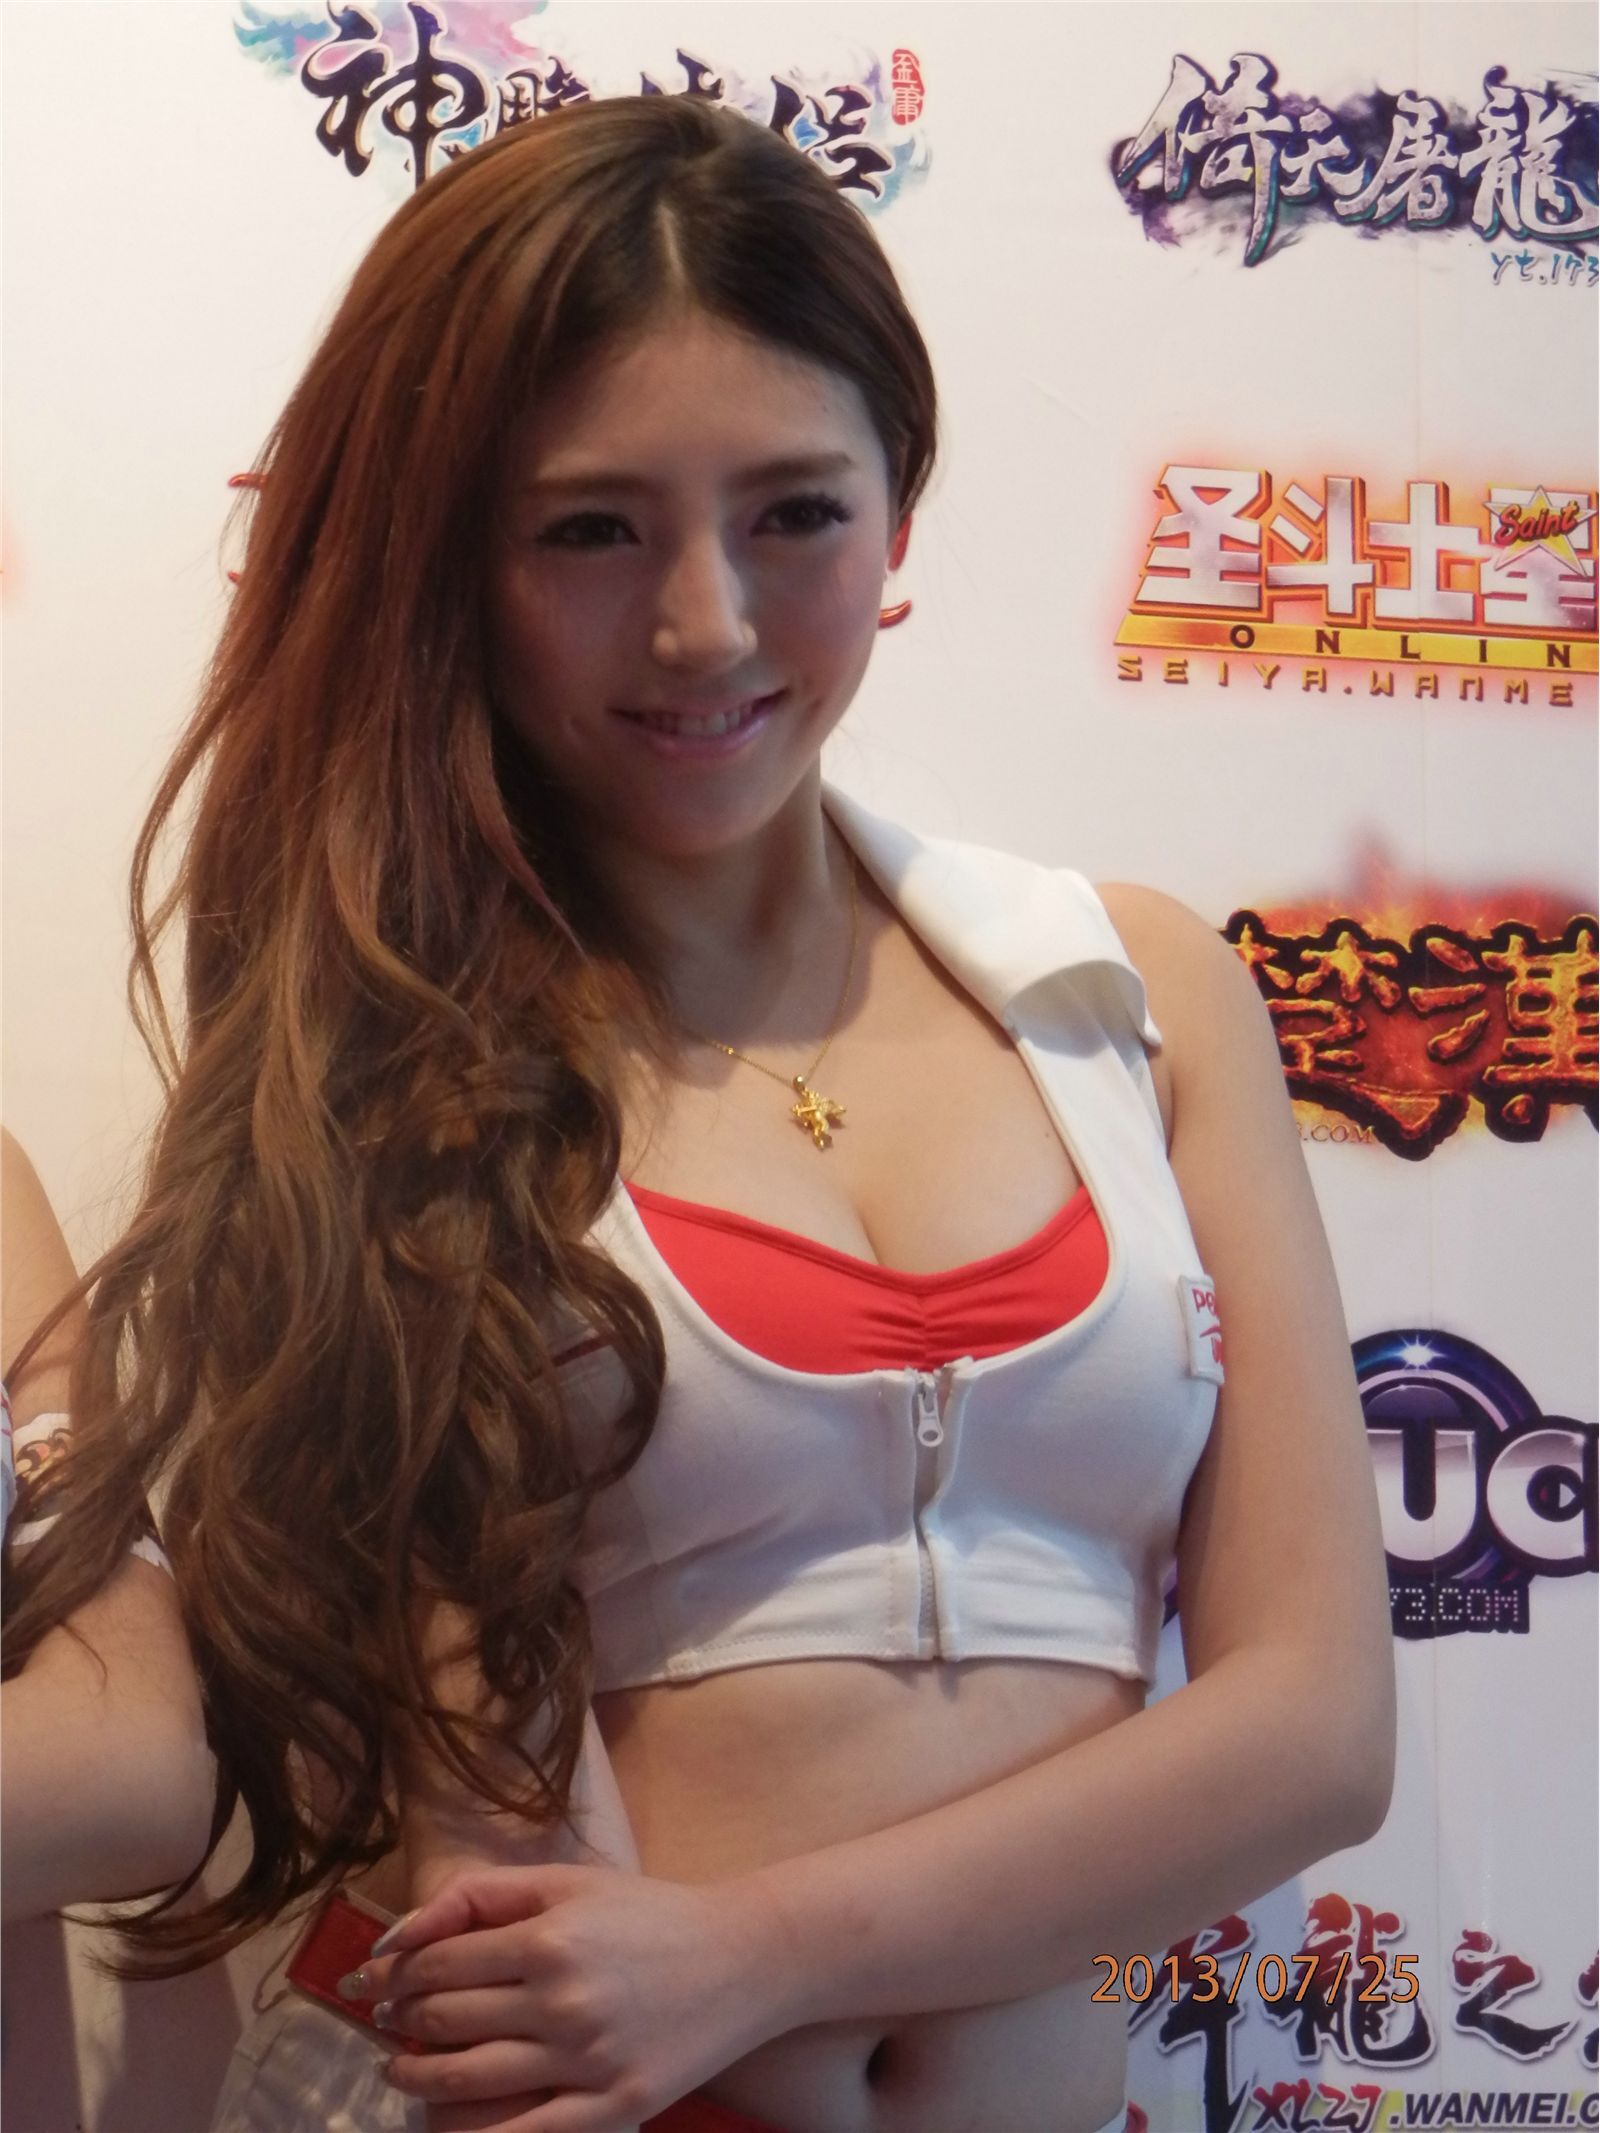 [online collection] July 27, 2013 Part 2 of the first day of the 11th ChinaJoy in Shanghai